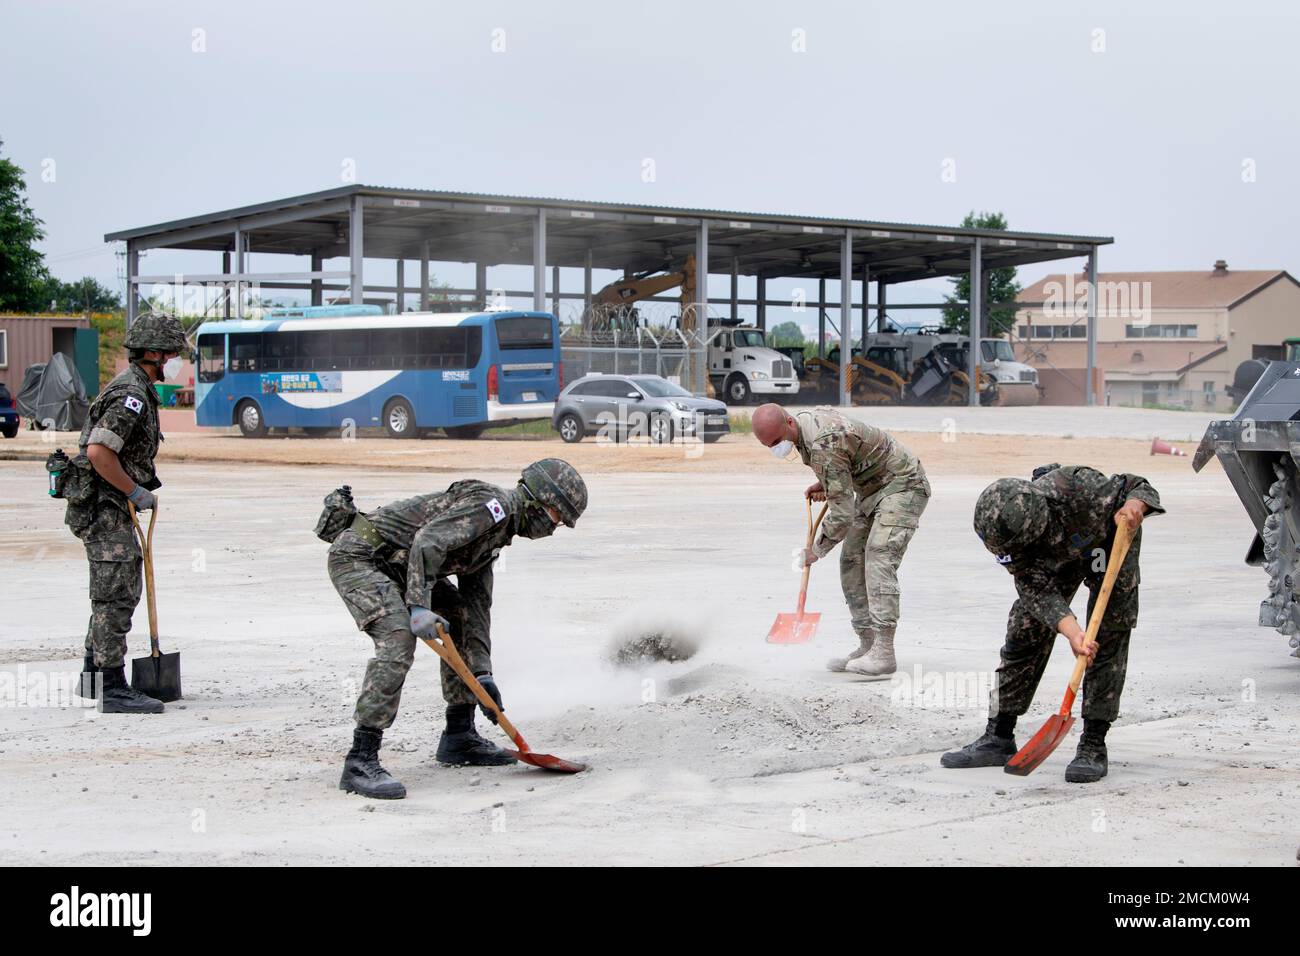 Senior Airman Ernesto Silio Cabrera, 35th Civil Engineer Squadron, water and fuels system maintenance technician from Misawa Air Base, Japan, and members of the Republic of Korea Air Force (ROKAF), shovel cement debris while conducting a runway repair training as part of a bilateral training scenario at Suwon Air Base, Republic of Korea, July 6, 2022. The members of the 35th CES traveled to Suwon Air Base to conduct bilateral training with the members of the Republic of Korea Air Force in order to enhance ROKAF-U.S. Air Force interoperability and increase readiness. Stock Photo